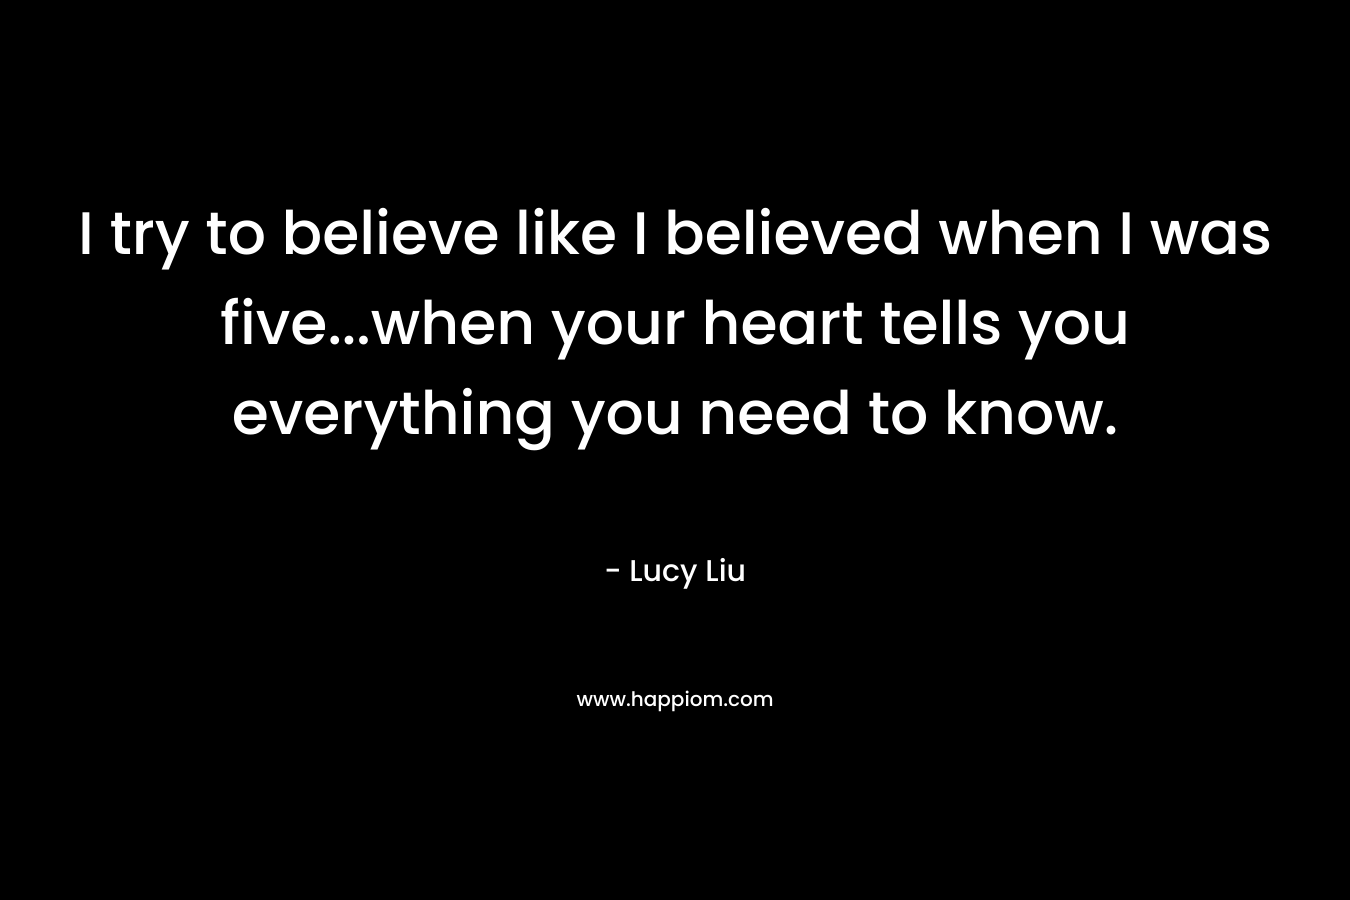 I try to believe like I believed when I was five...when your heart tells you everything you need to know.